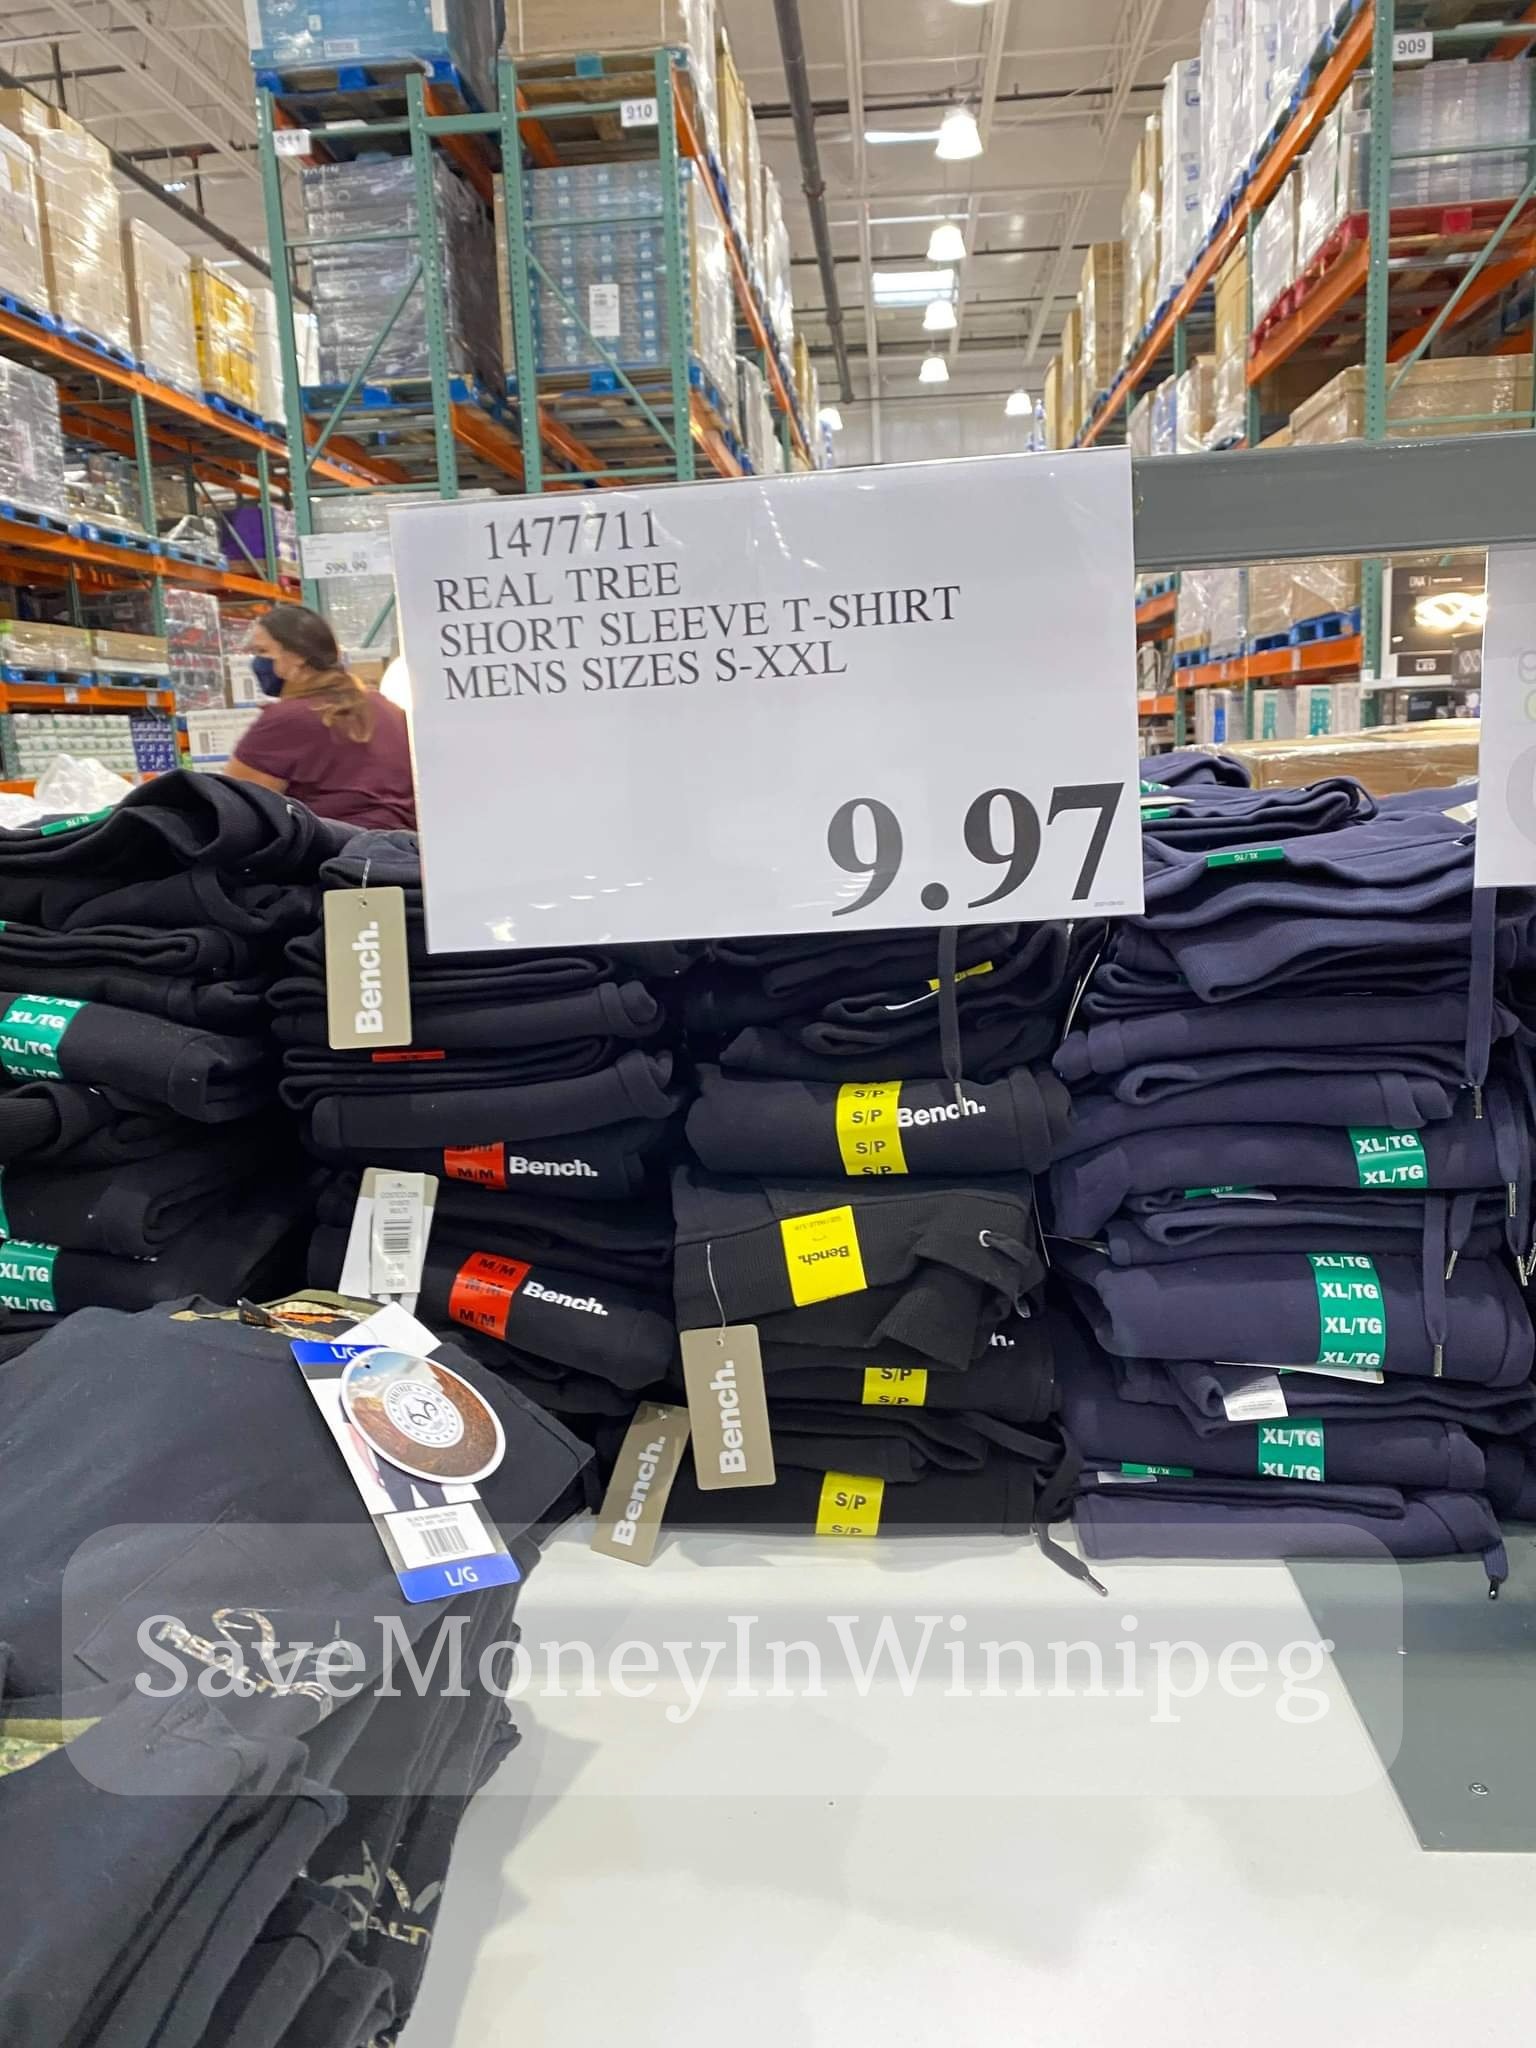 Part 1 (of 3!!!!) Costco unadvertised deals of the week starting August 3rd  - Save Money in Winnipeg